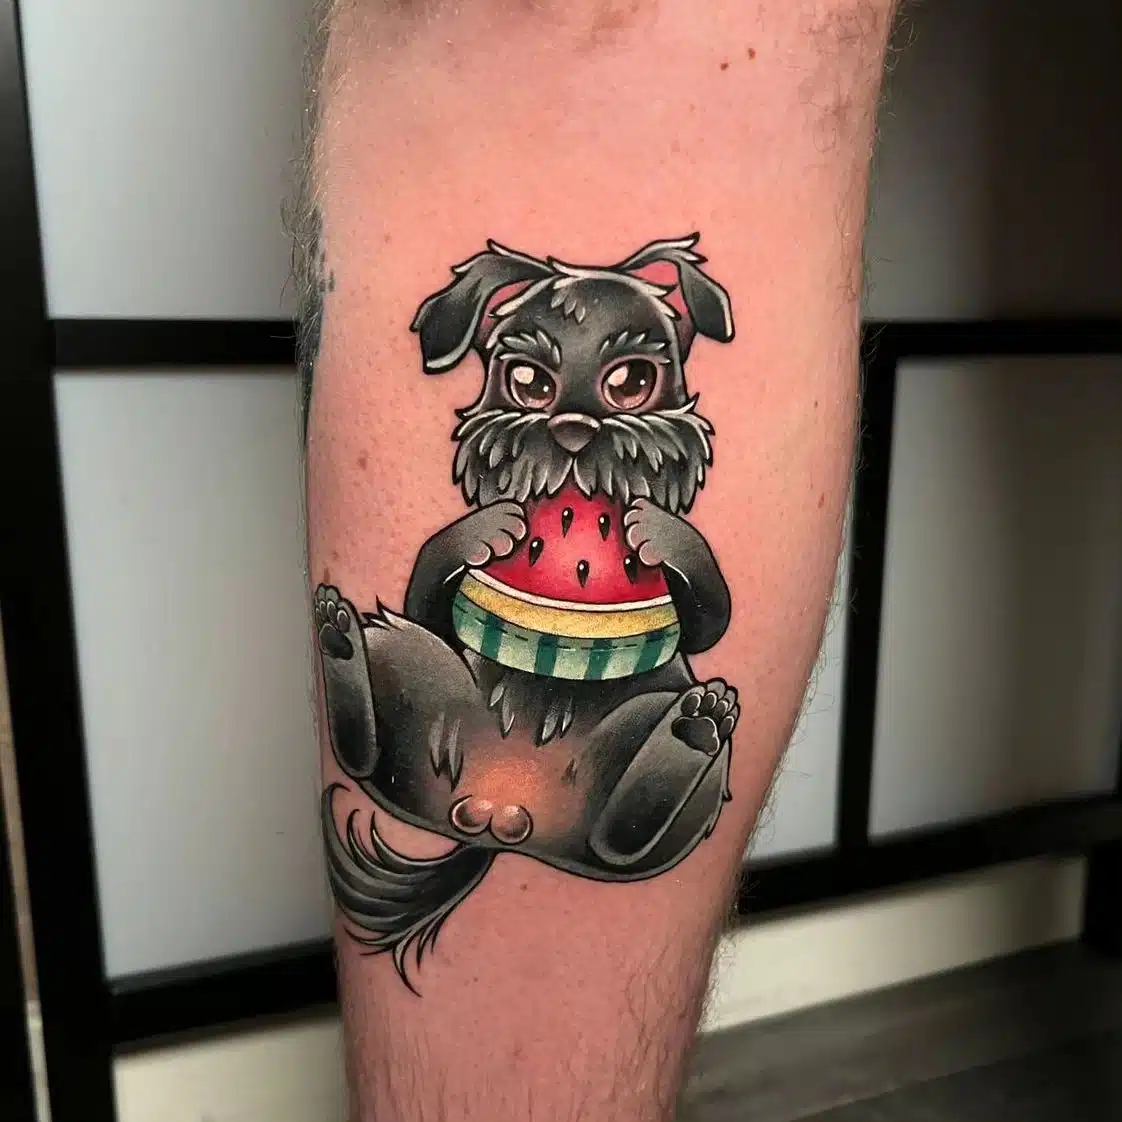 Gino! Our wee furry shop dog and his favourite plushie beautifully made by Natalia. (Though he has been castrated his wee baws were added in memorandum). 
naaat.j 

Done using:
yayofamilia
unigloves 
masttattoo.official 
Sponsored by:
magnumtattoosupplies.uk
yayofamilia

                    totaltattoo  tattoosnob  scottishtattooclub  female_tattoo_artists 